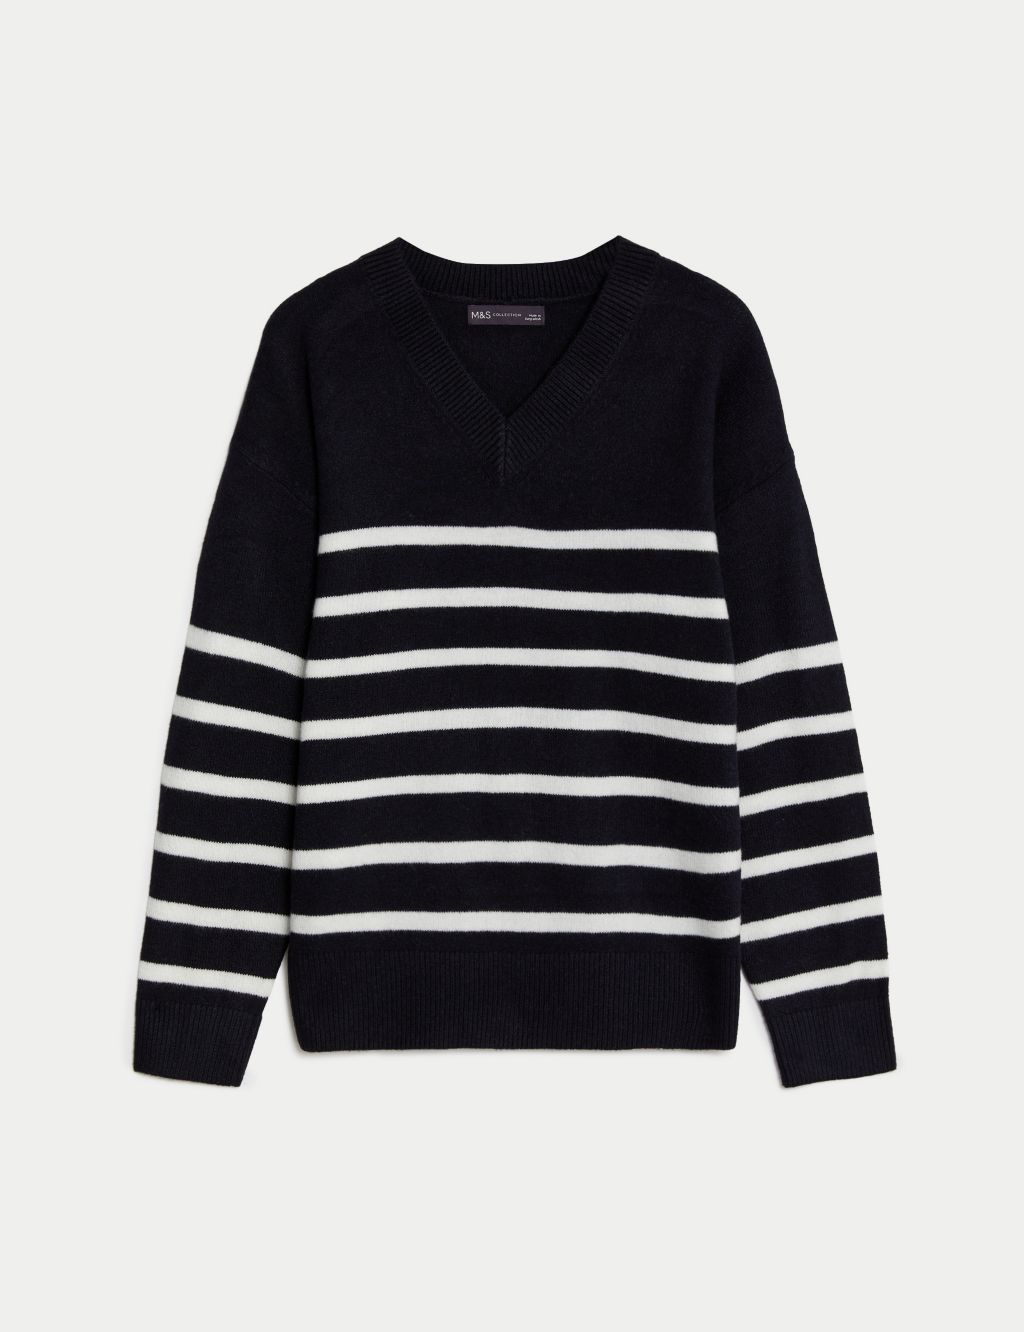 Air-Yarn Striped V-Neck Jumper | M&S Collection | M&S